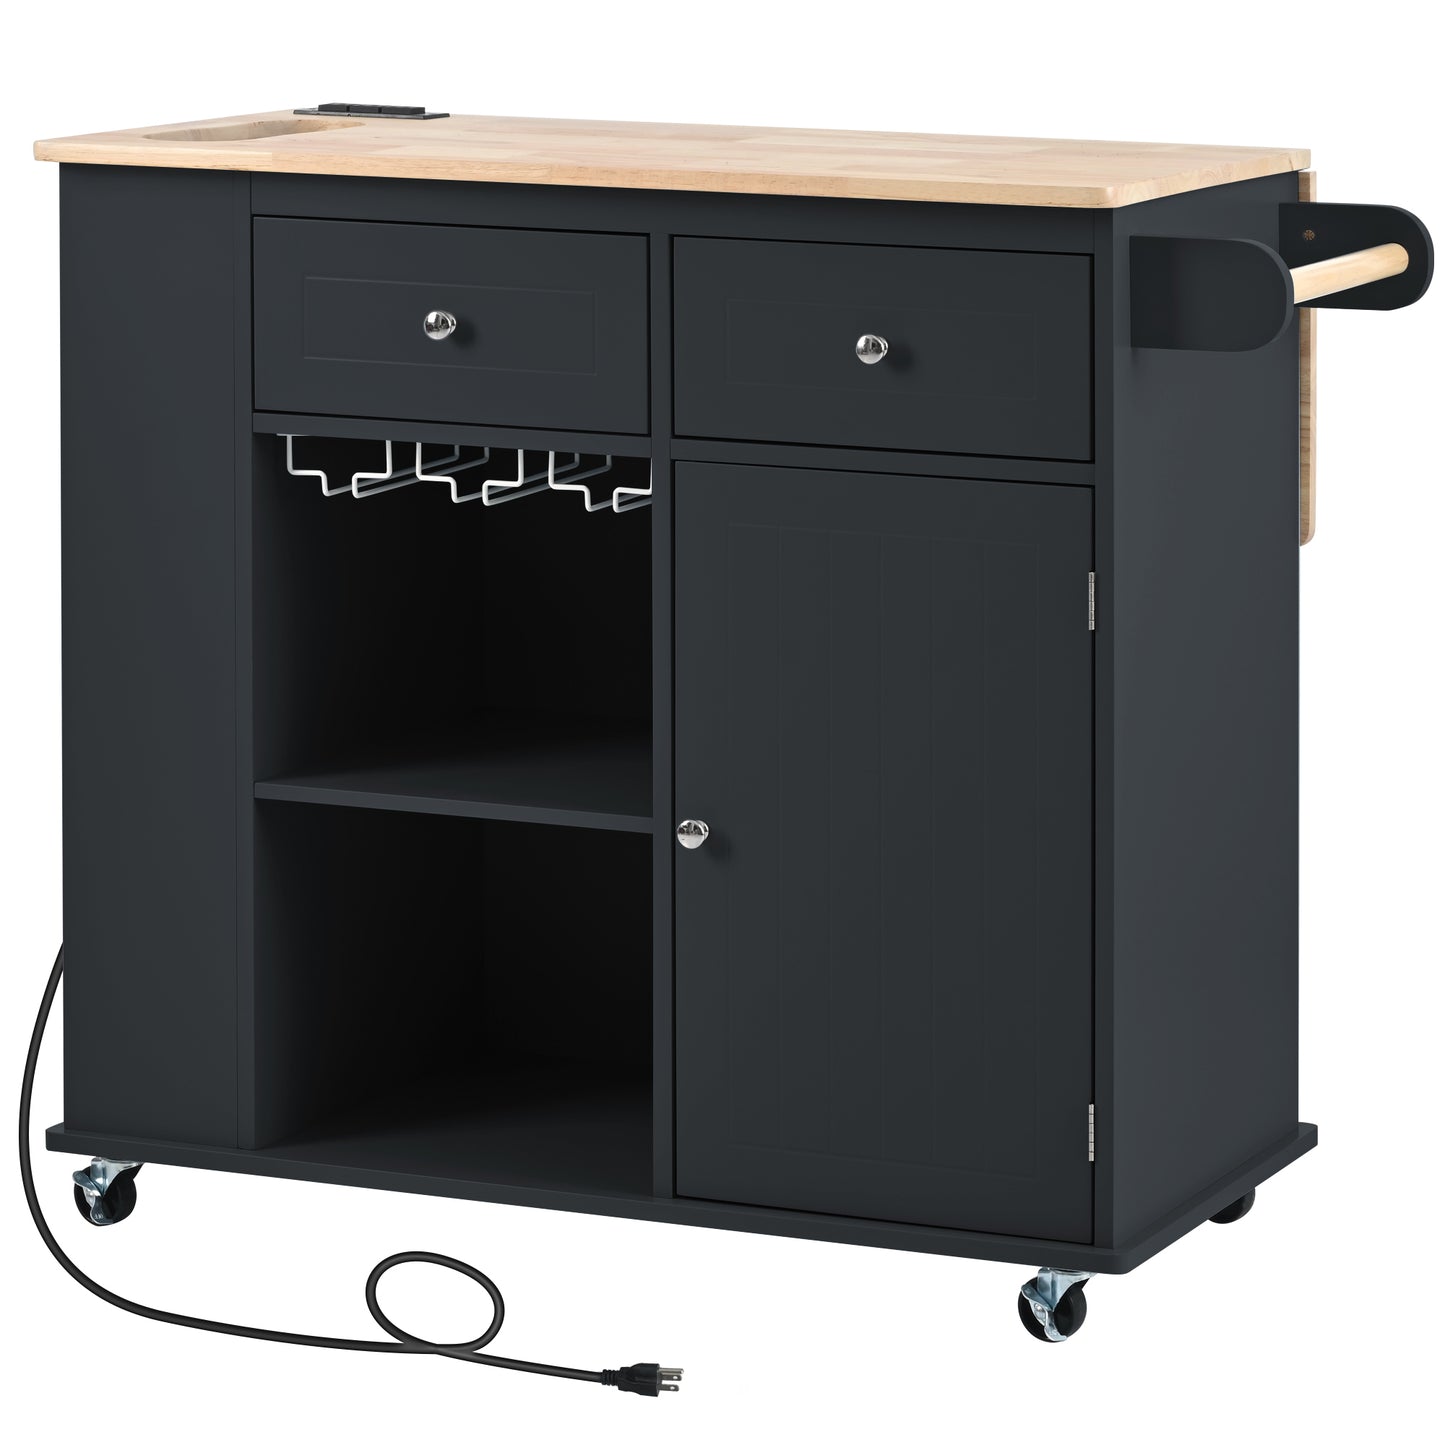 Kitchen Island with Power Outlet,Kitchen Storage Island with Drop Leaf and Rubber Wood,Open Storage and Wine Rack,5 Wheels,with Adjustable Storage for Home, Kitchen, and Dining Room, Black